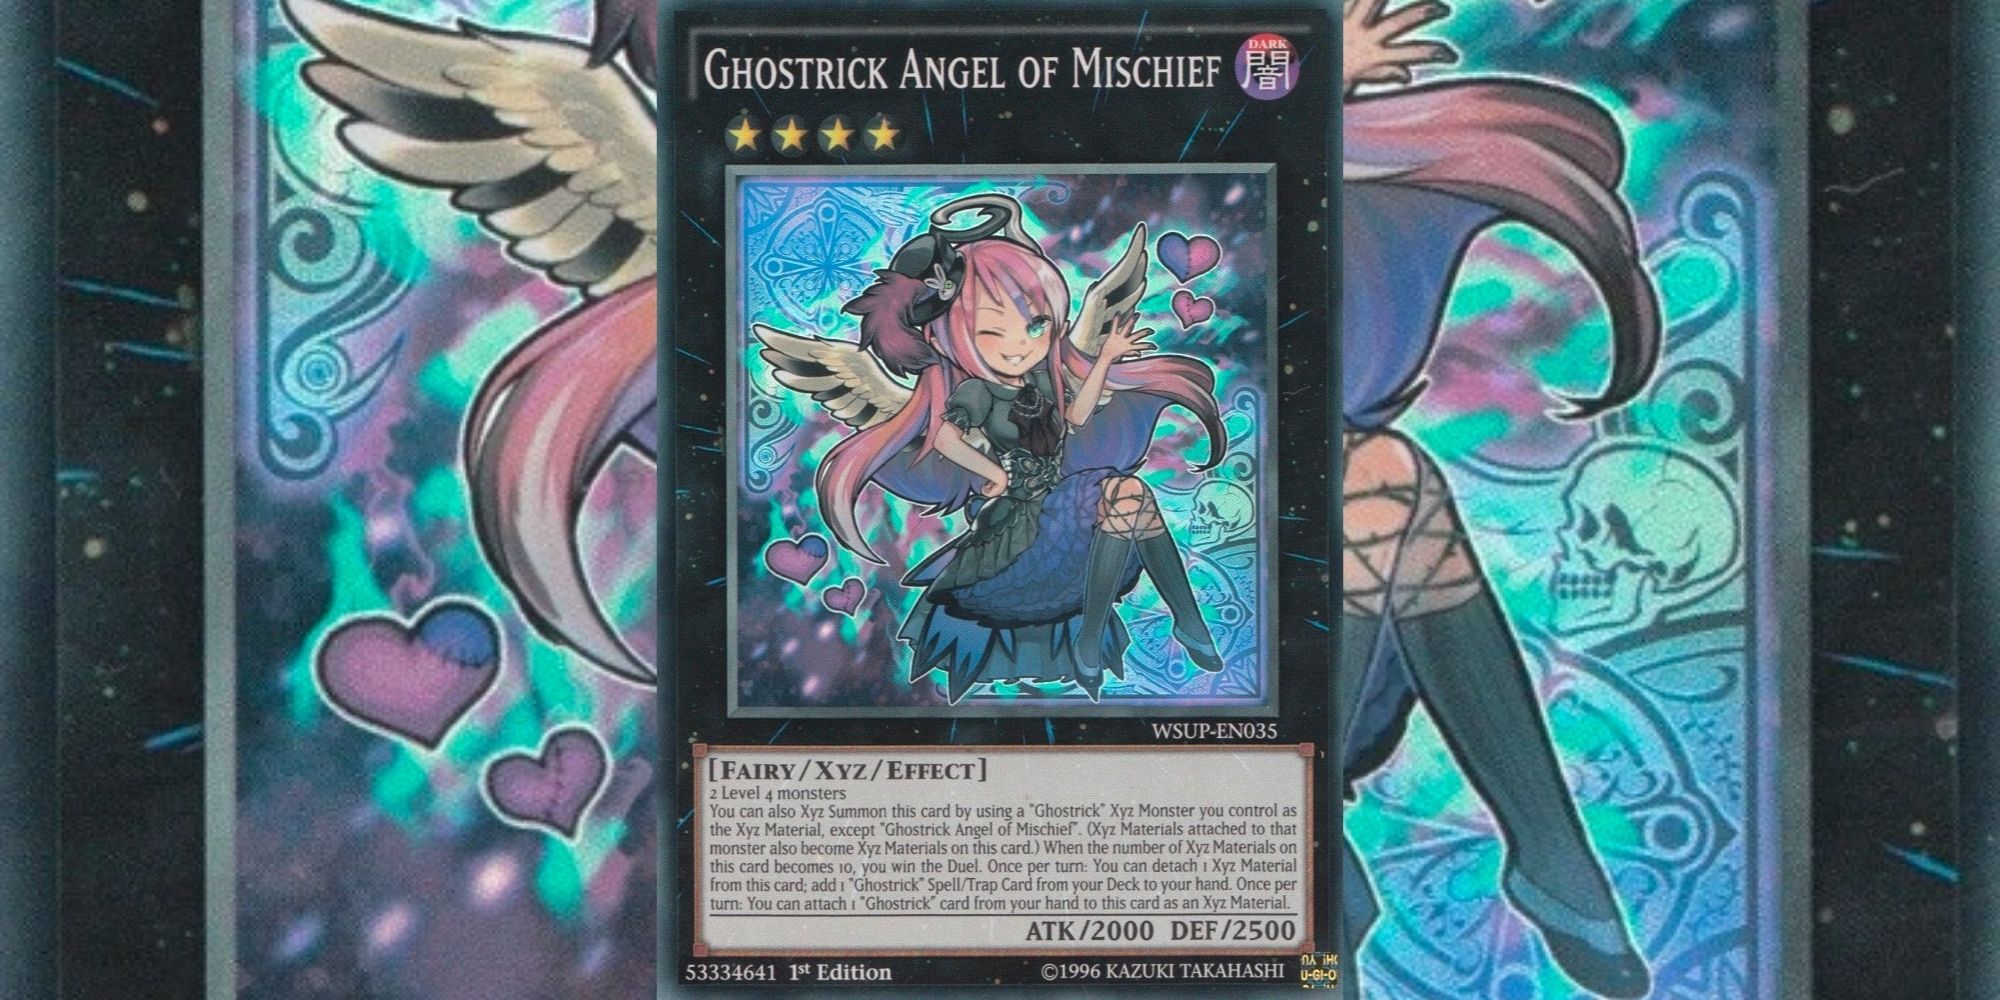 Ghostrick Angel of Mischief card in Yu-Gi-Oh!